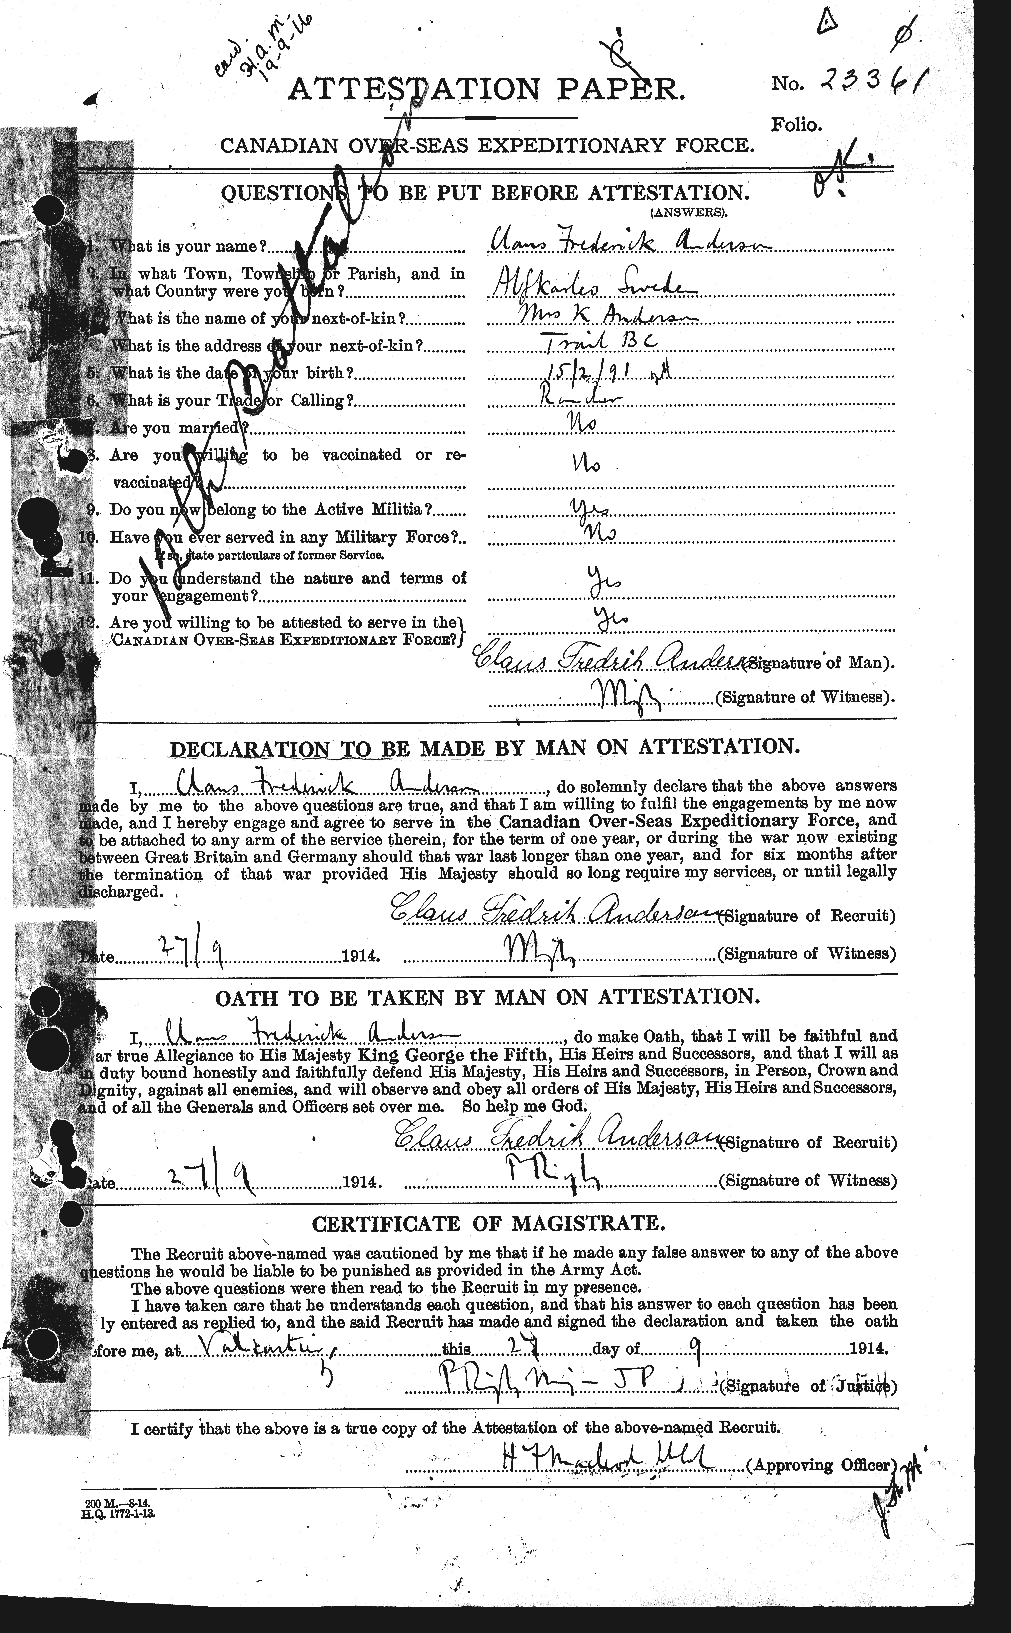 Personnel Records of the First World War - CEF 210066a